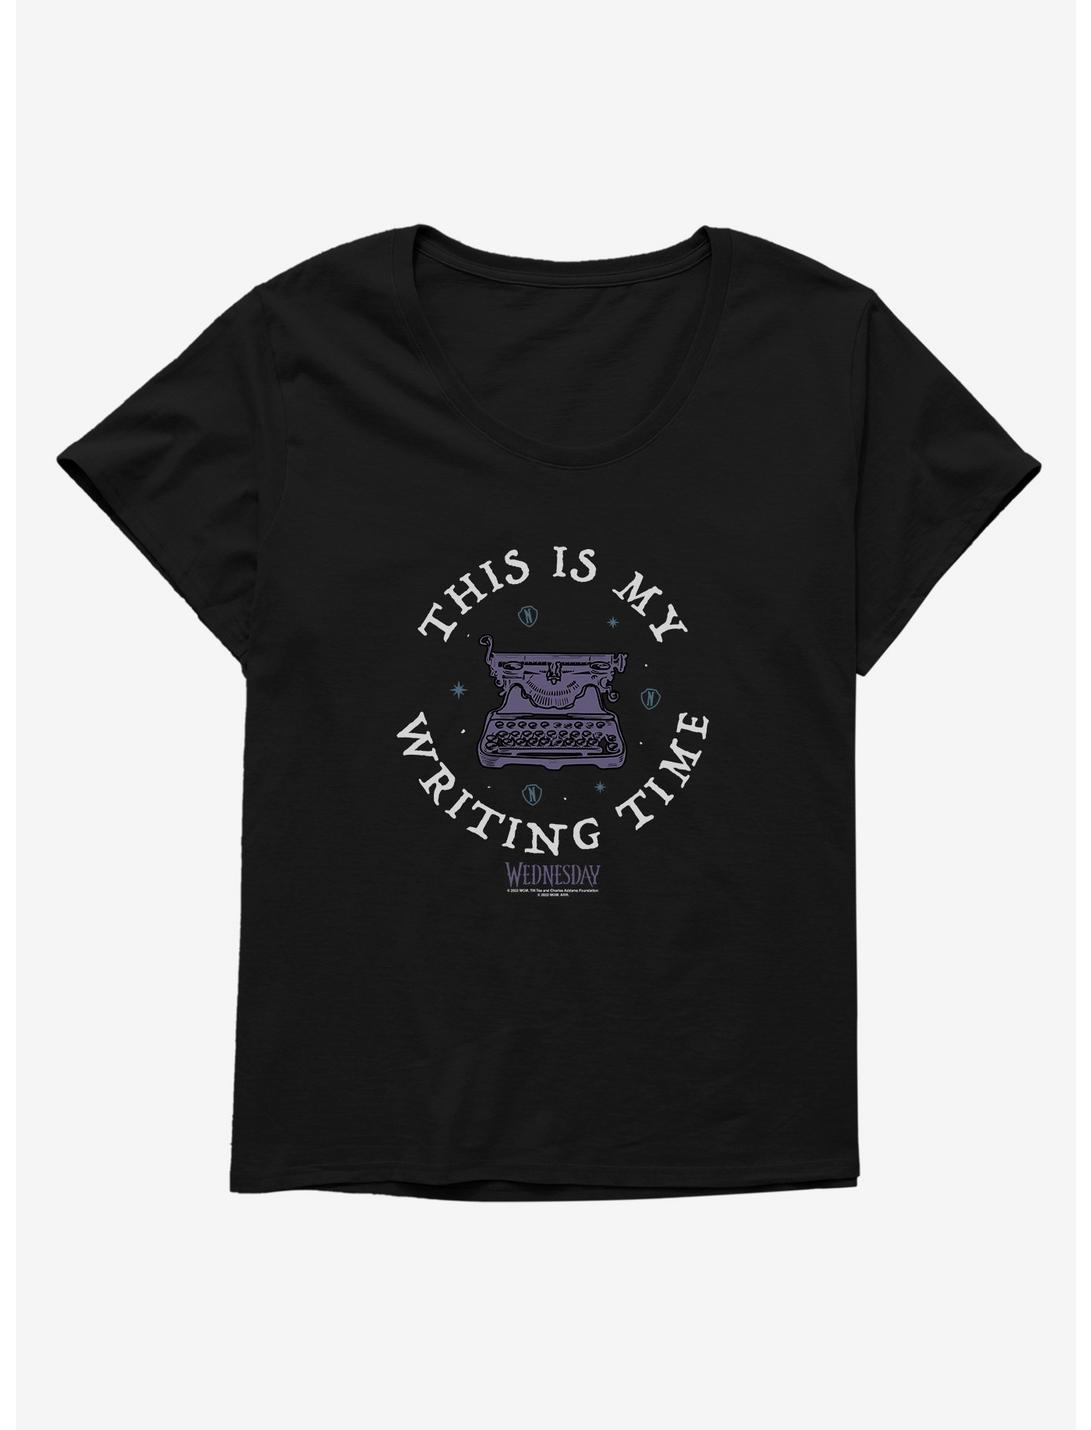 Wednesday This Is My Writing Time Womens T-Shirt Plus Size, BLACK, hi-res